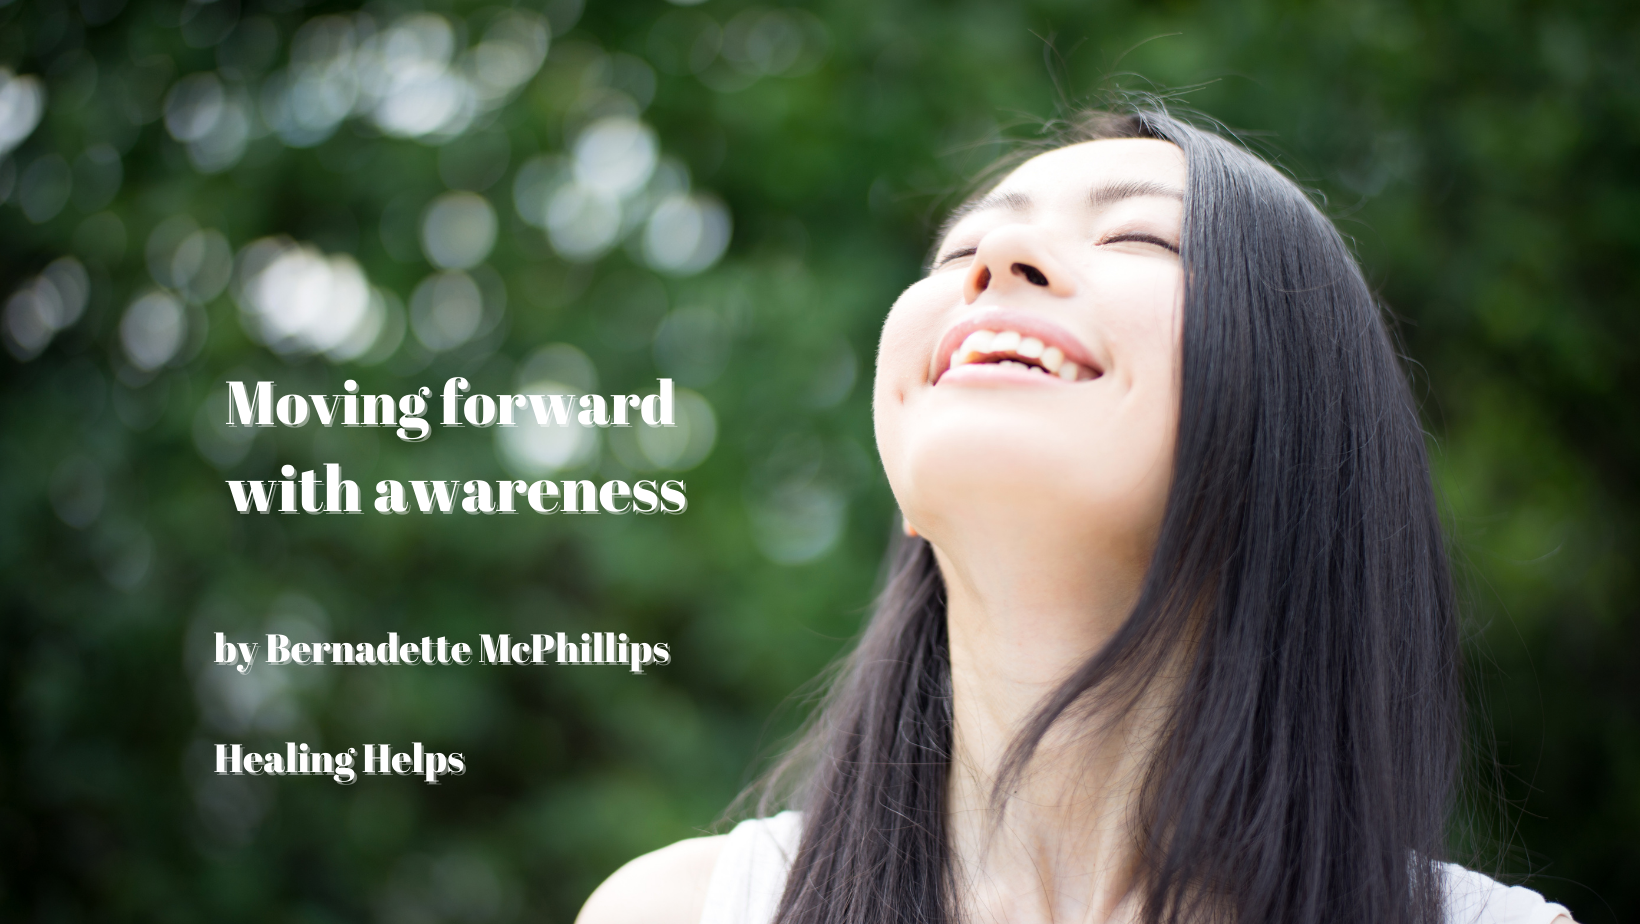 Moving forward with awareness by berndette mcphillips